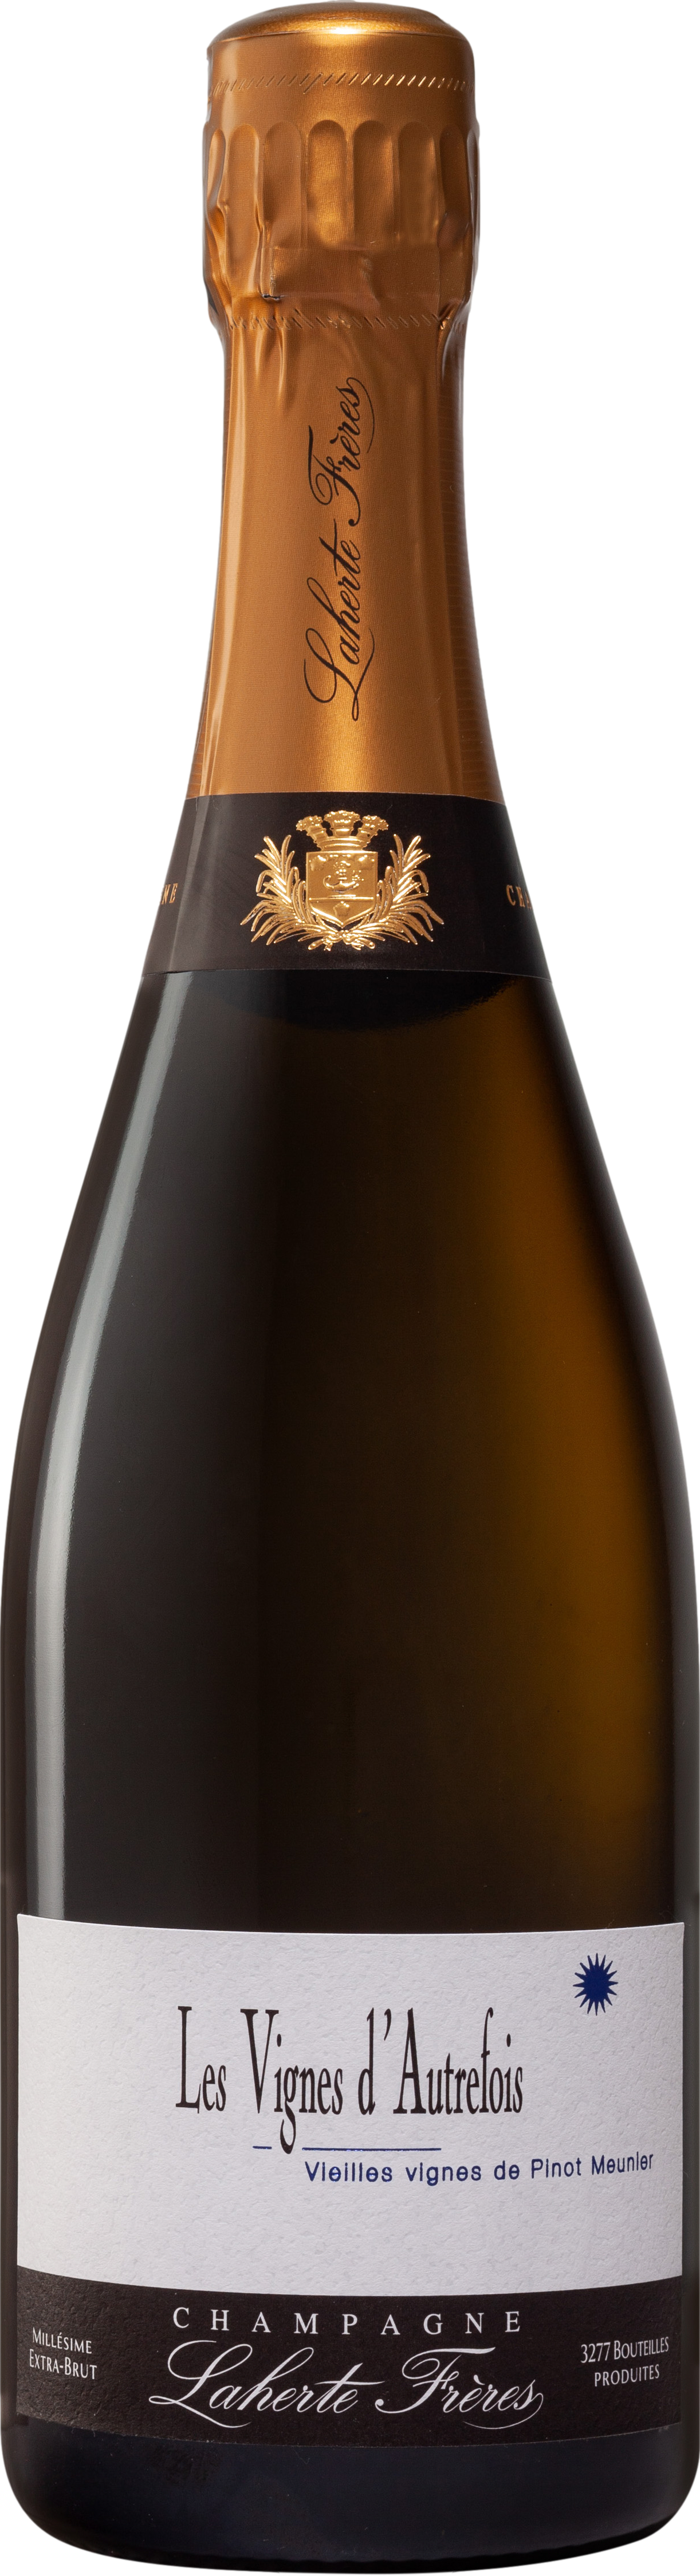 Product image of Champagne Laherte Freres Les Vignes d'Autrefois 2018 from 8wines